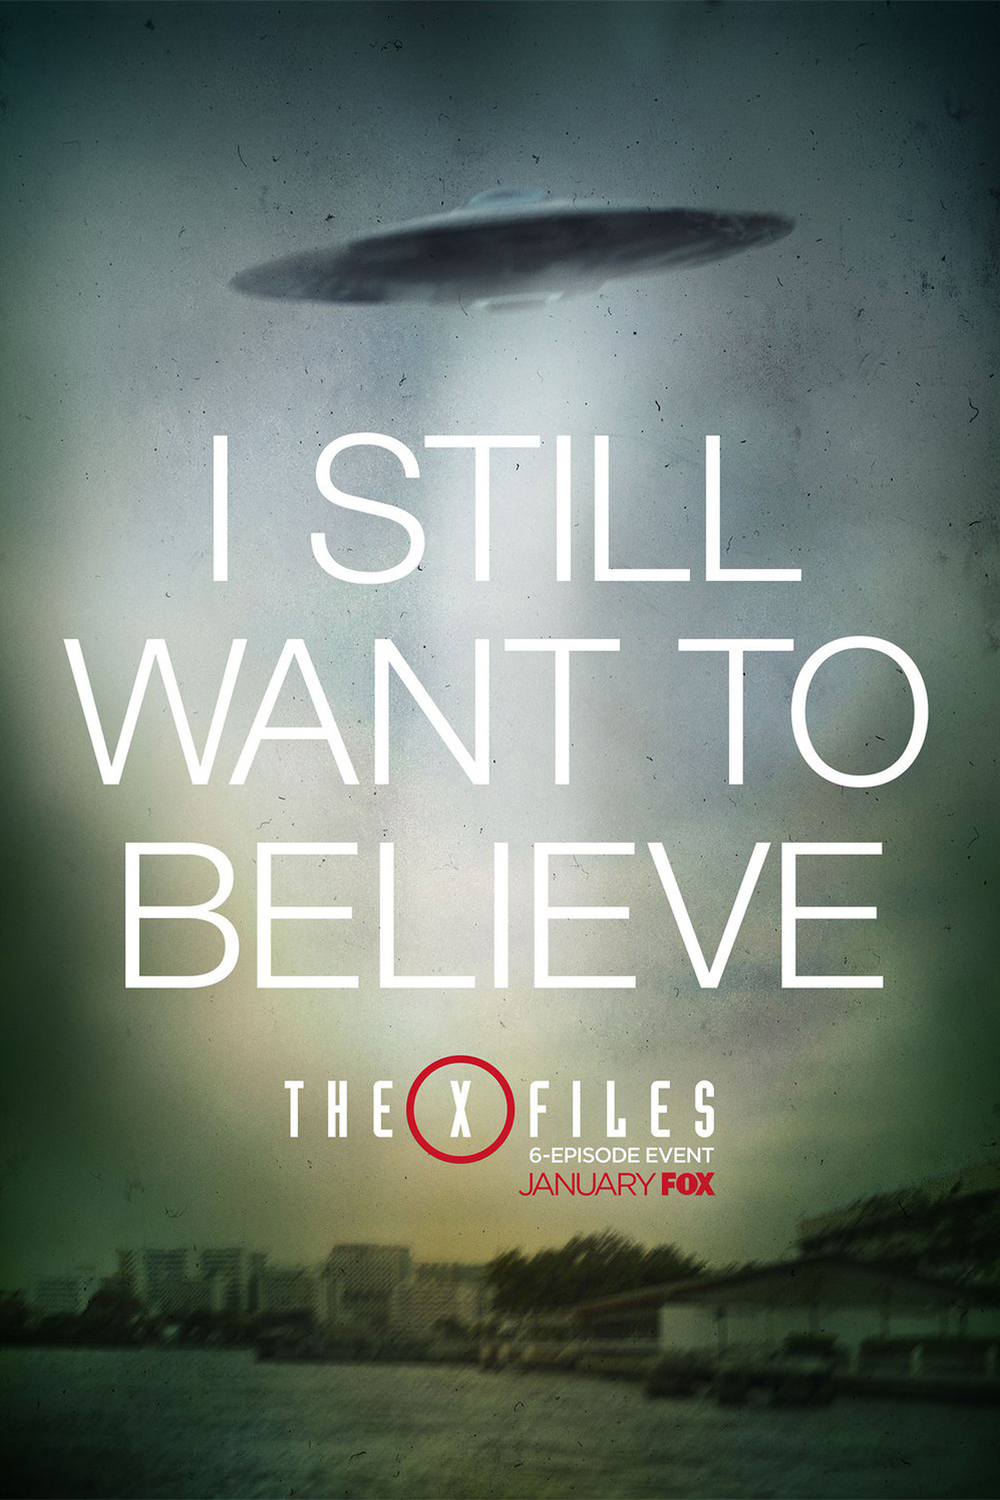 The X-files Revival Posters - X Files Iphone X , HD Wallpaper & Backgrounds